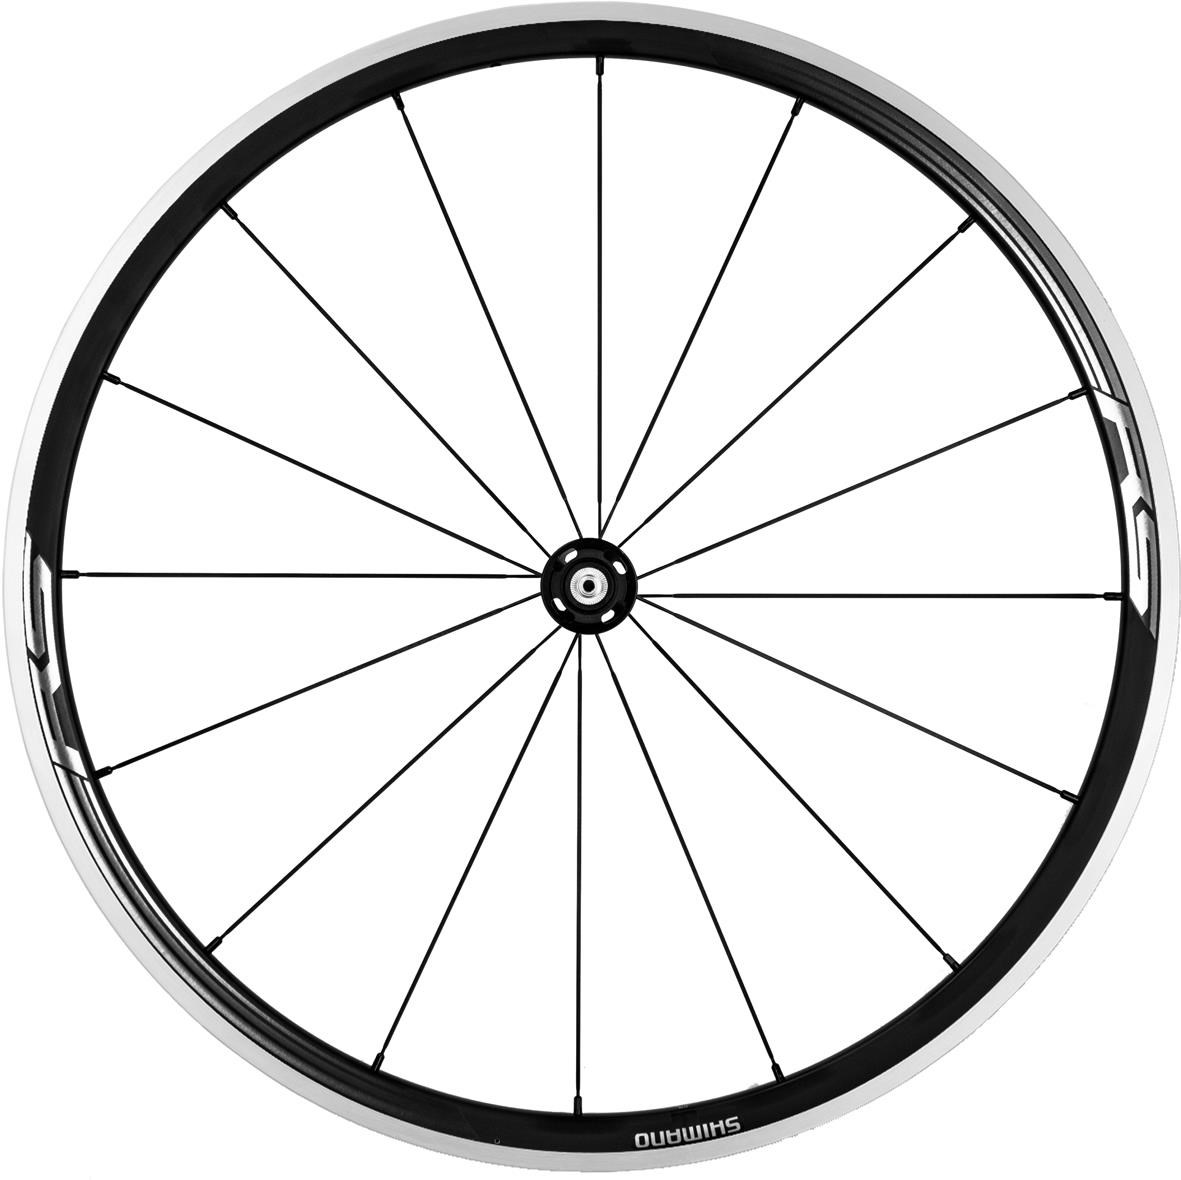 Shimano WH-RS330 Wheel, Clincher 30 mm, Black, Front